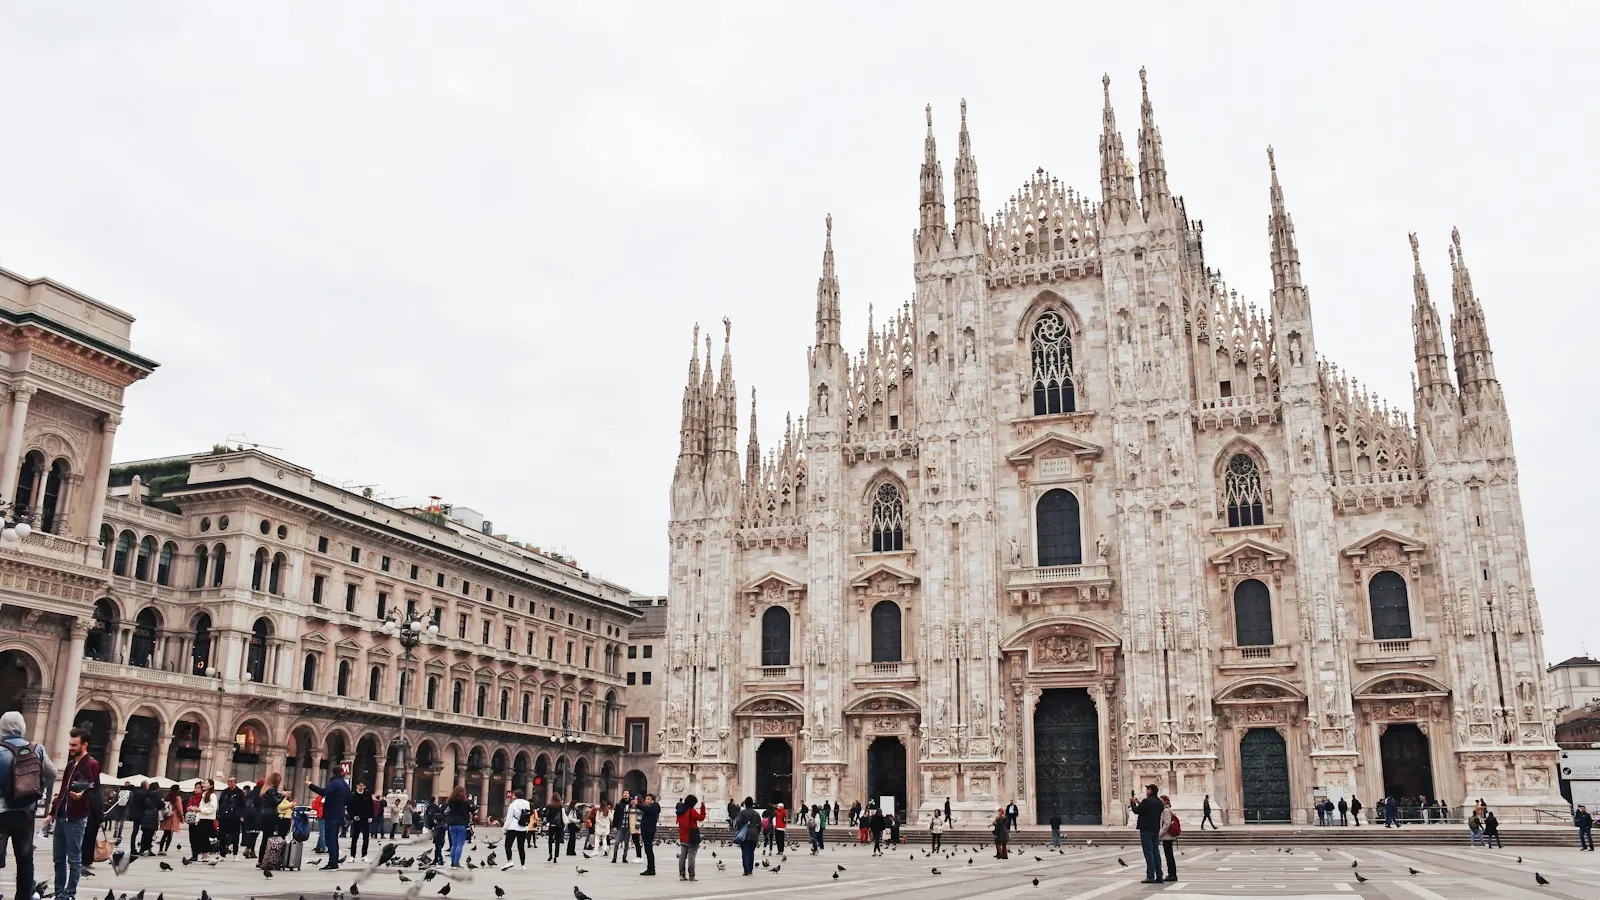 Discover the top 10 scams in Milan that tourists should watch out for. Learn how to react and avoid falling victim to scams in Milan.